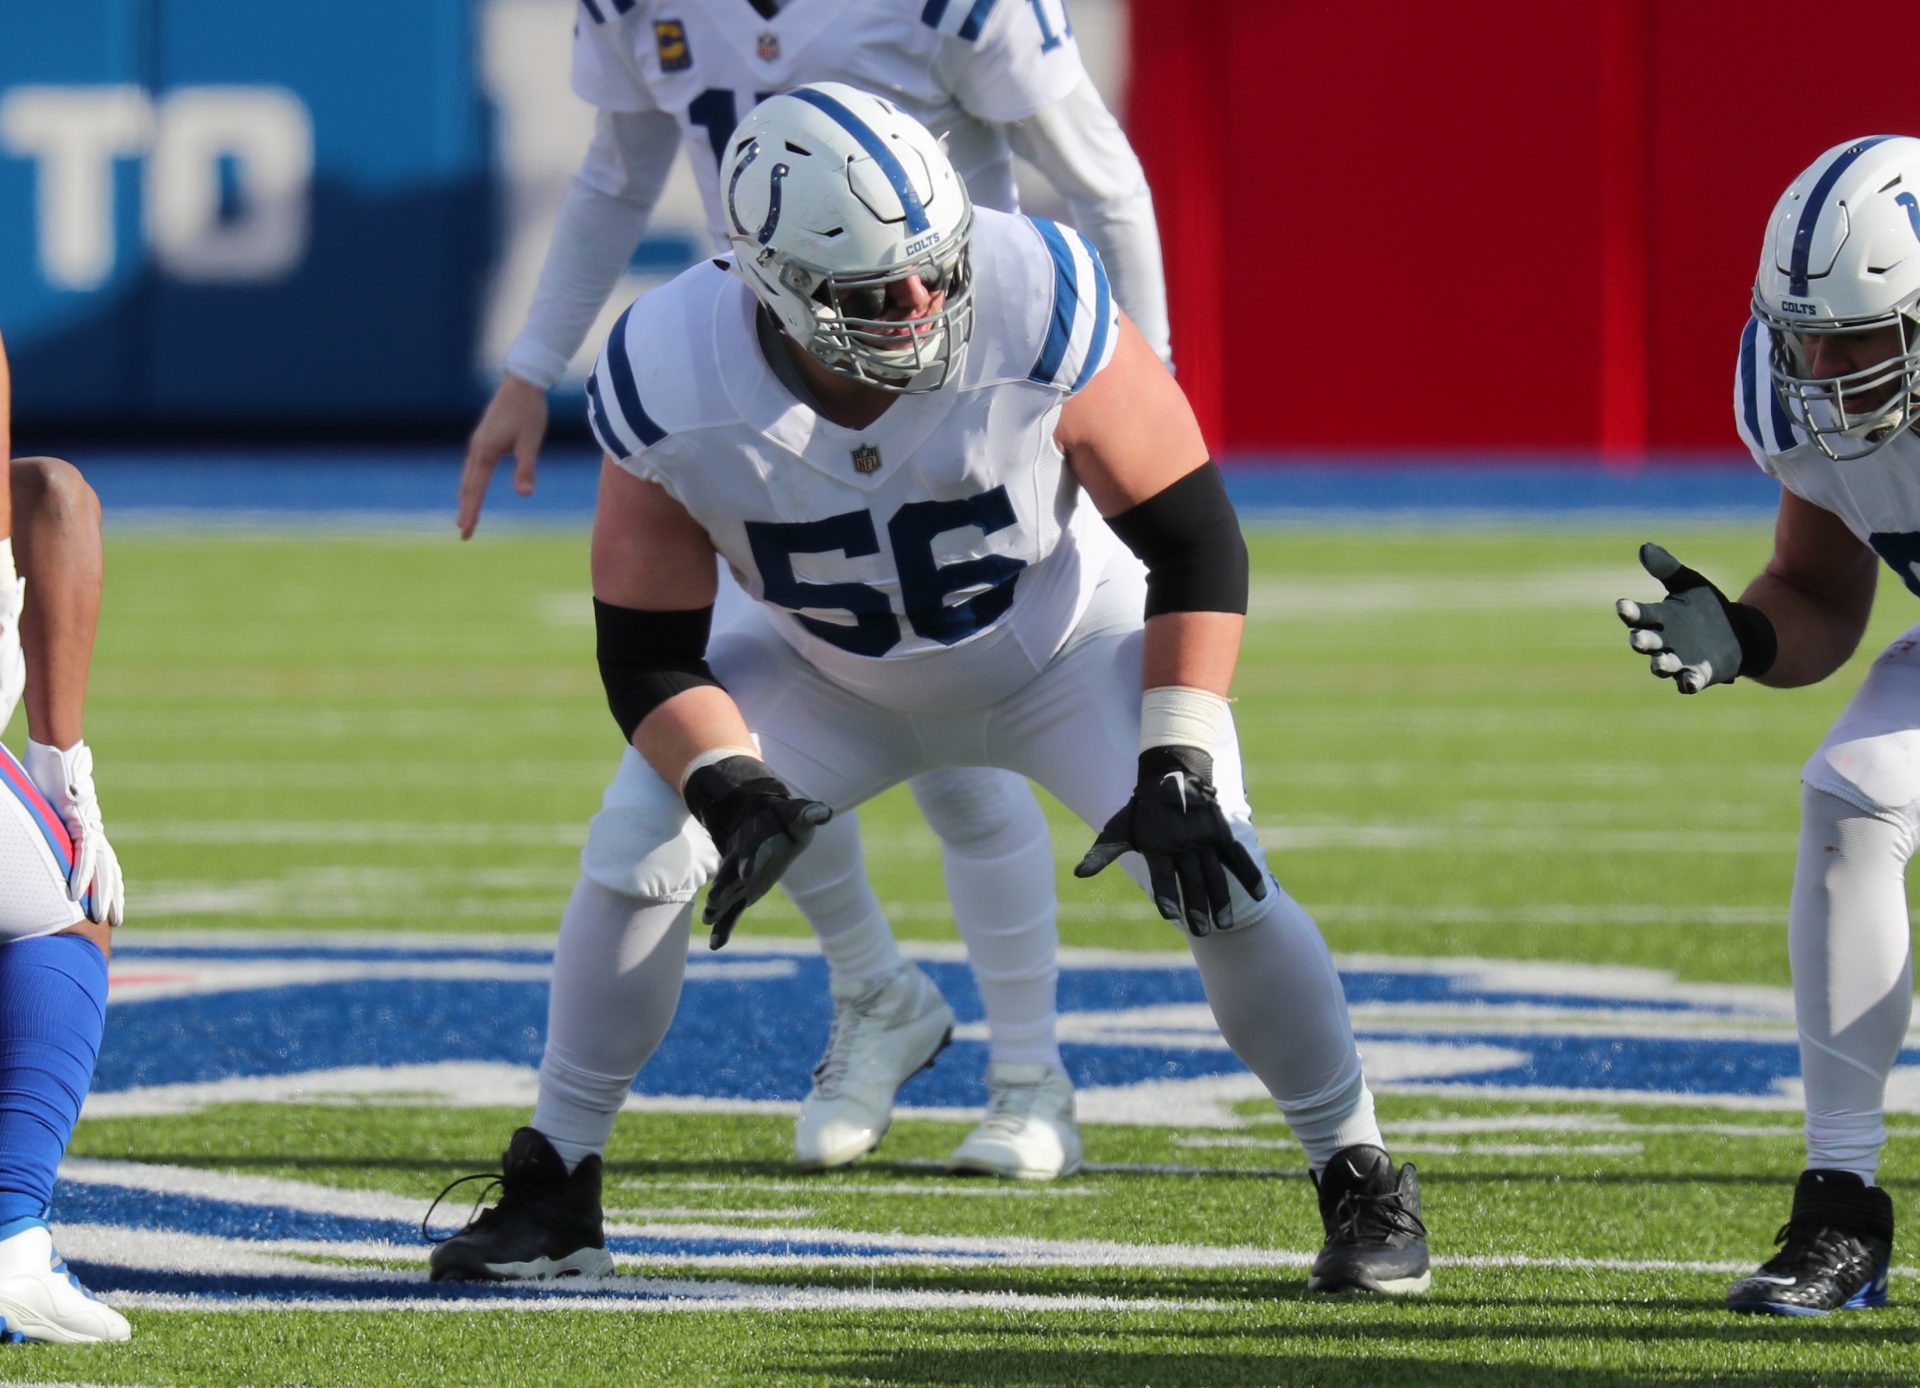 Quenton Nelson, Eric Fisher Placed on Colts’ COVID-19 Checklist